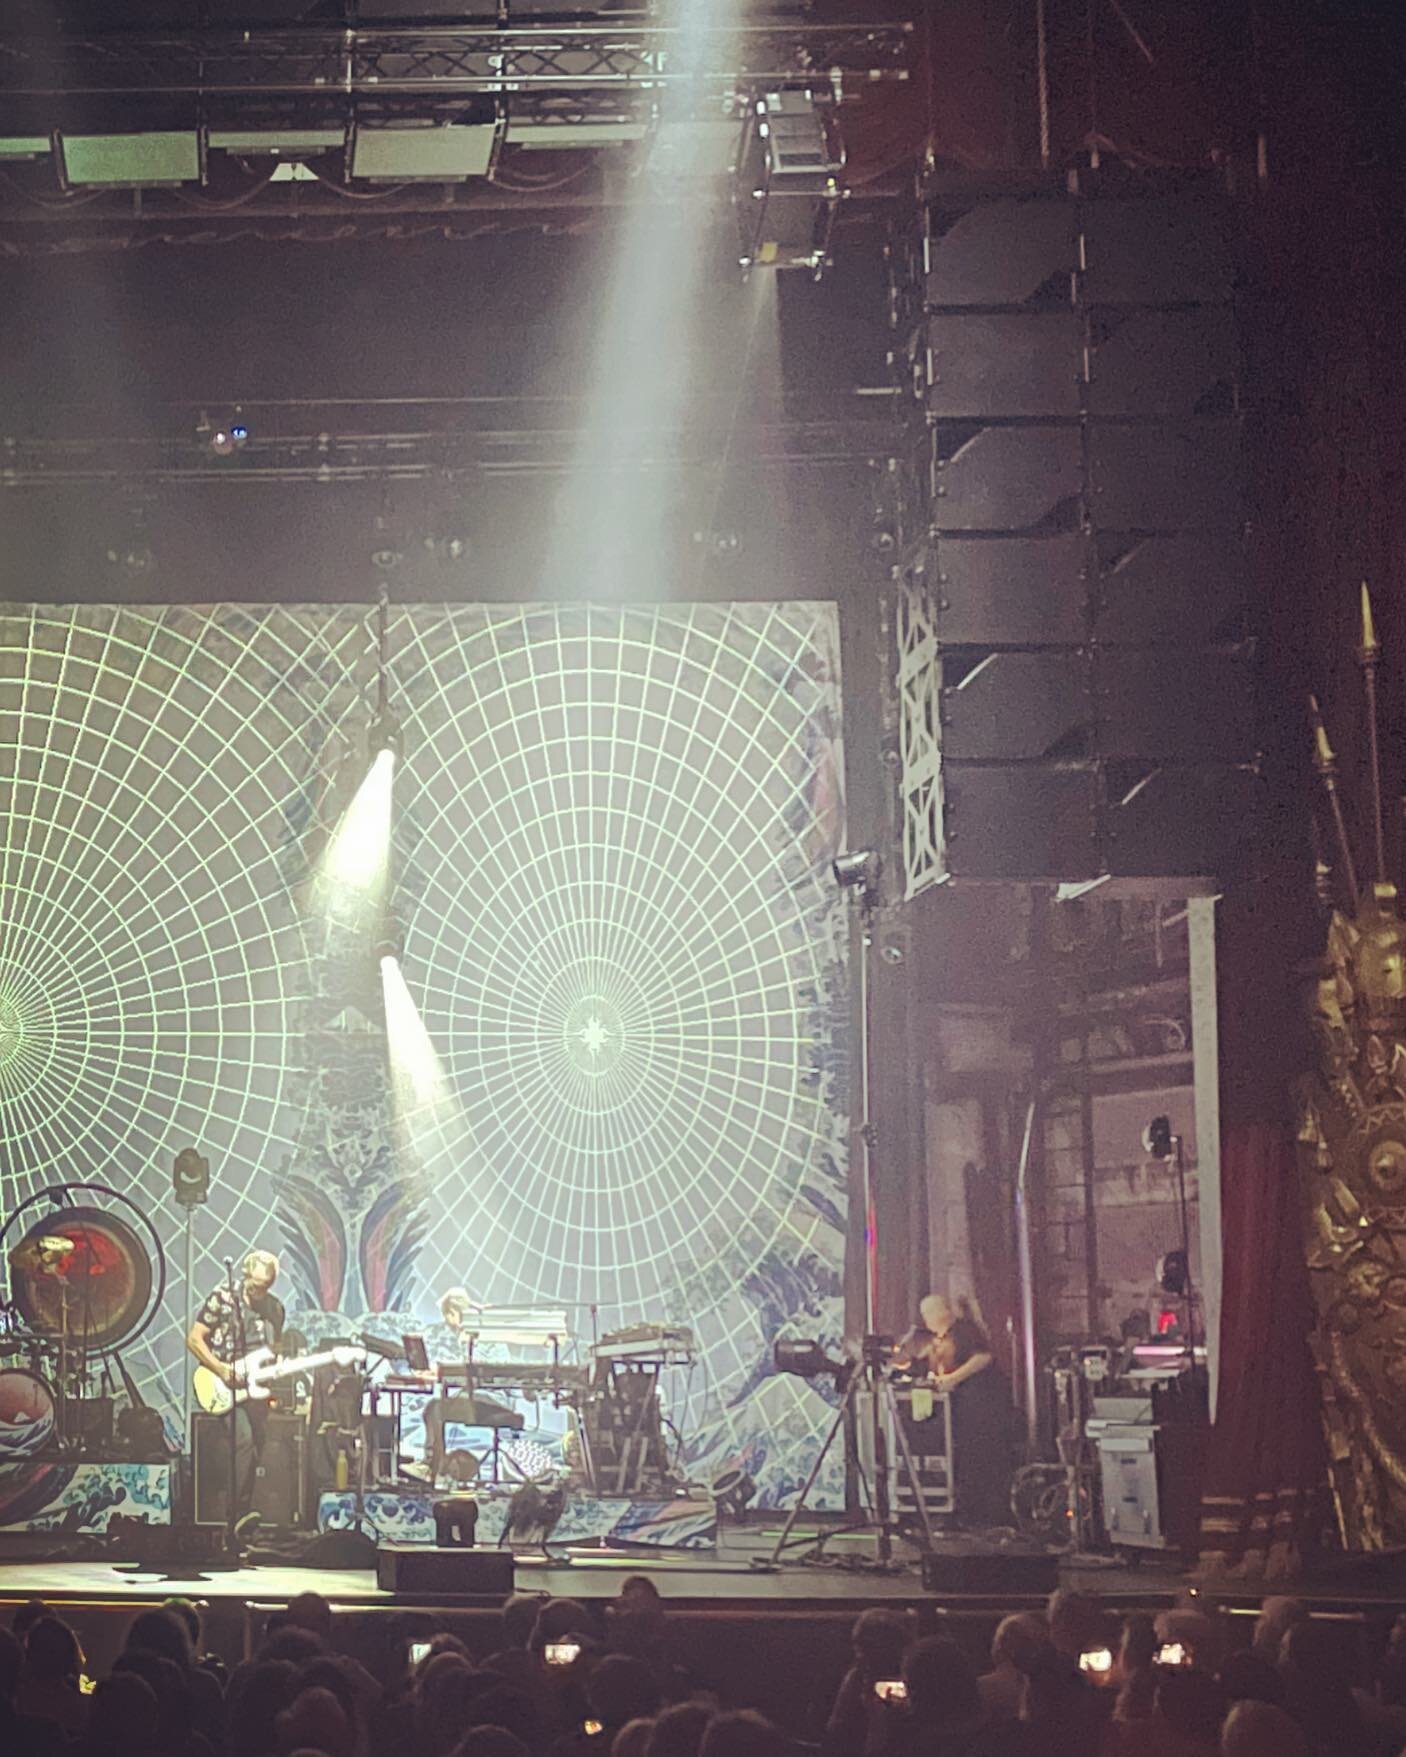 Last night we had an opportunity to mix on the new and rather revolutionary Holoplot PA system, installed in The Beacon theatre, New York. We had a great sounding show but barely scratched the surface of what this product has been designed to accompl